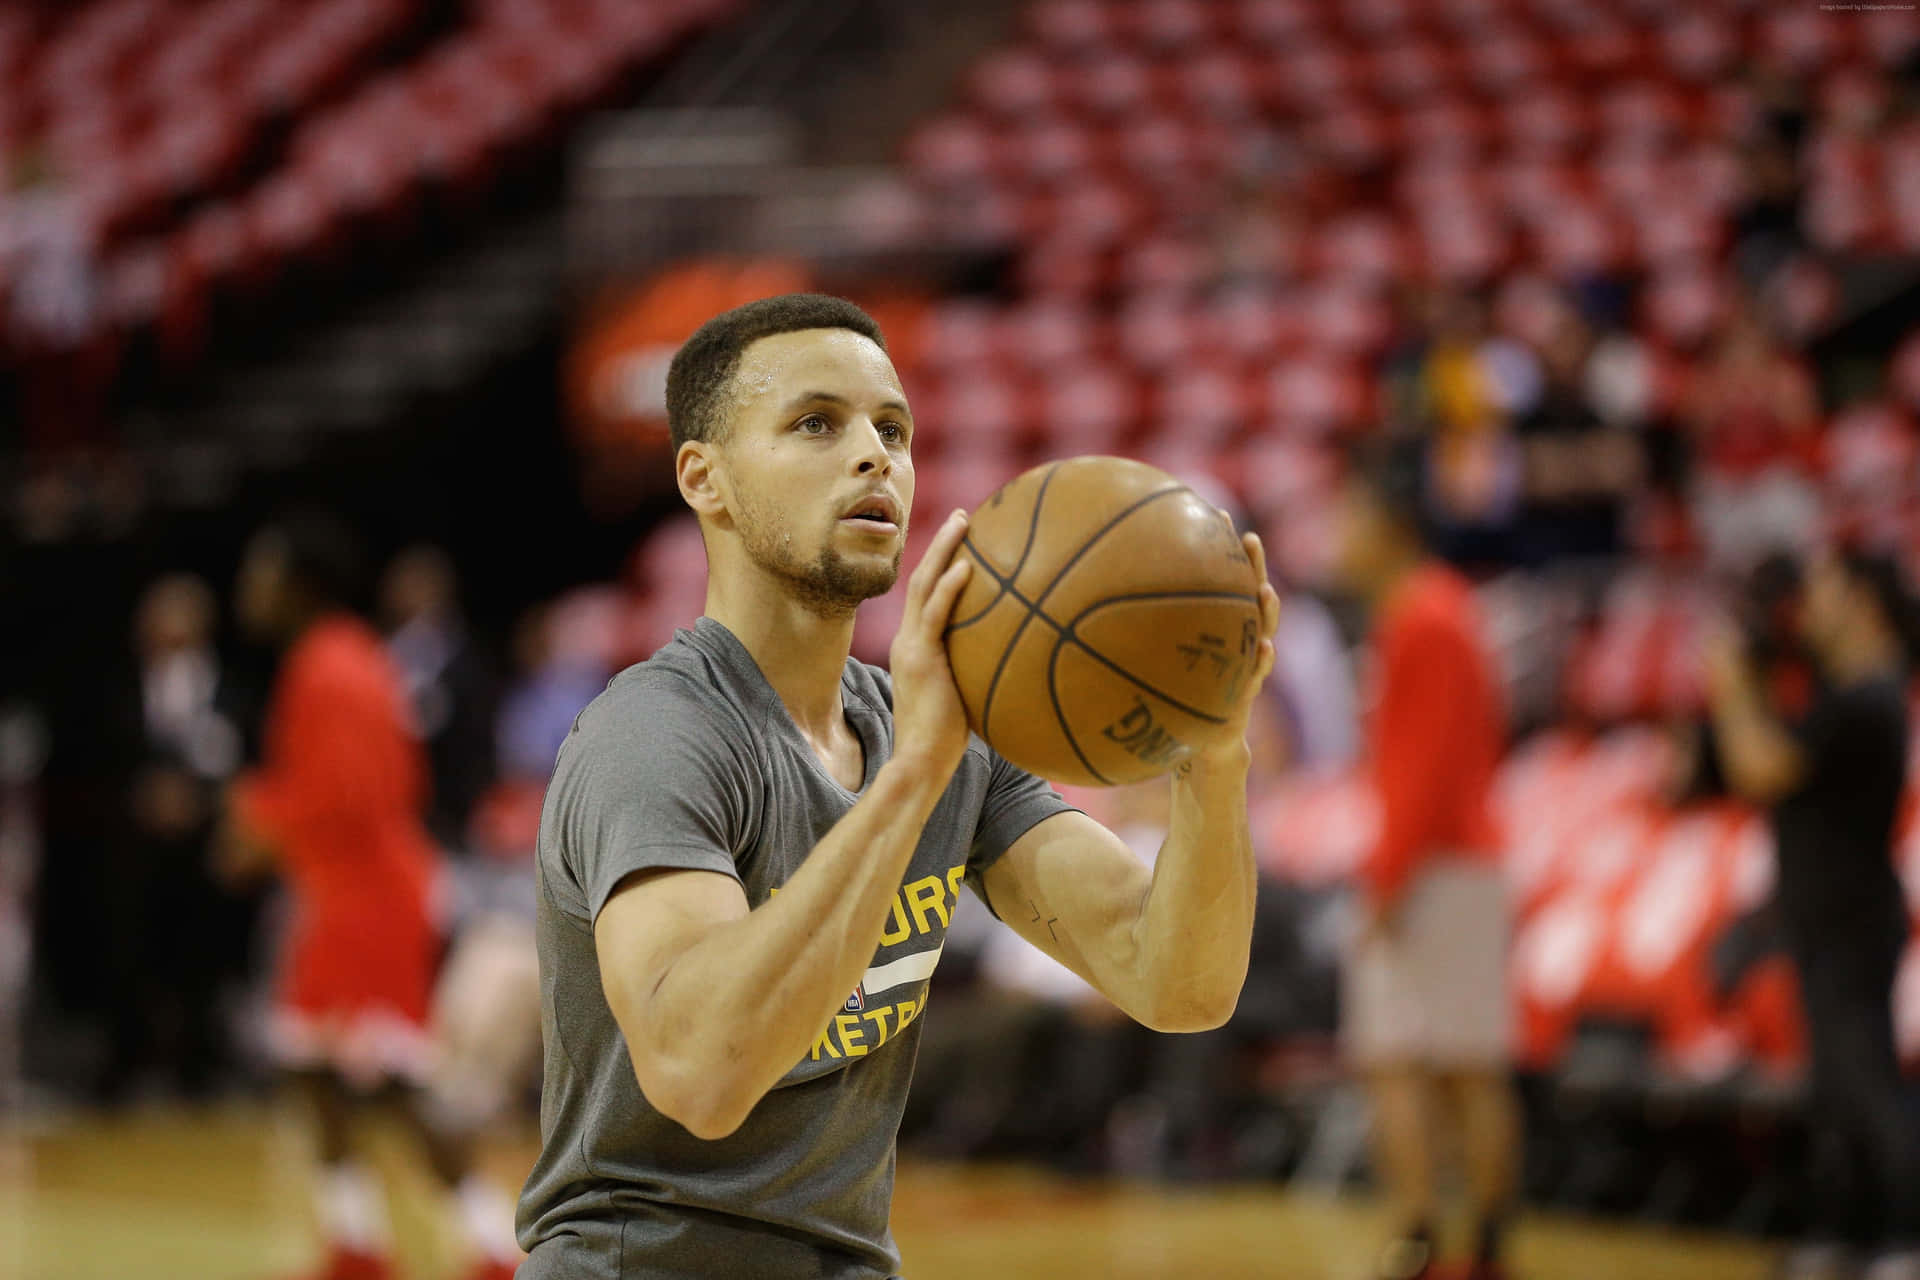 Steph Curry - NBA MVP and 3-Time Champion